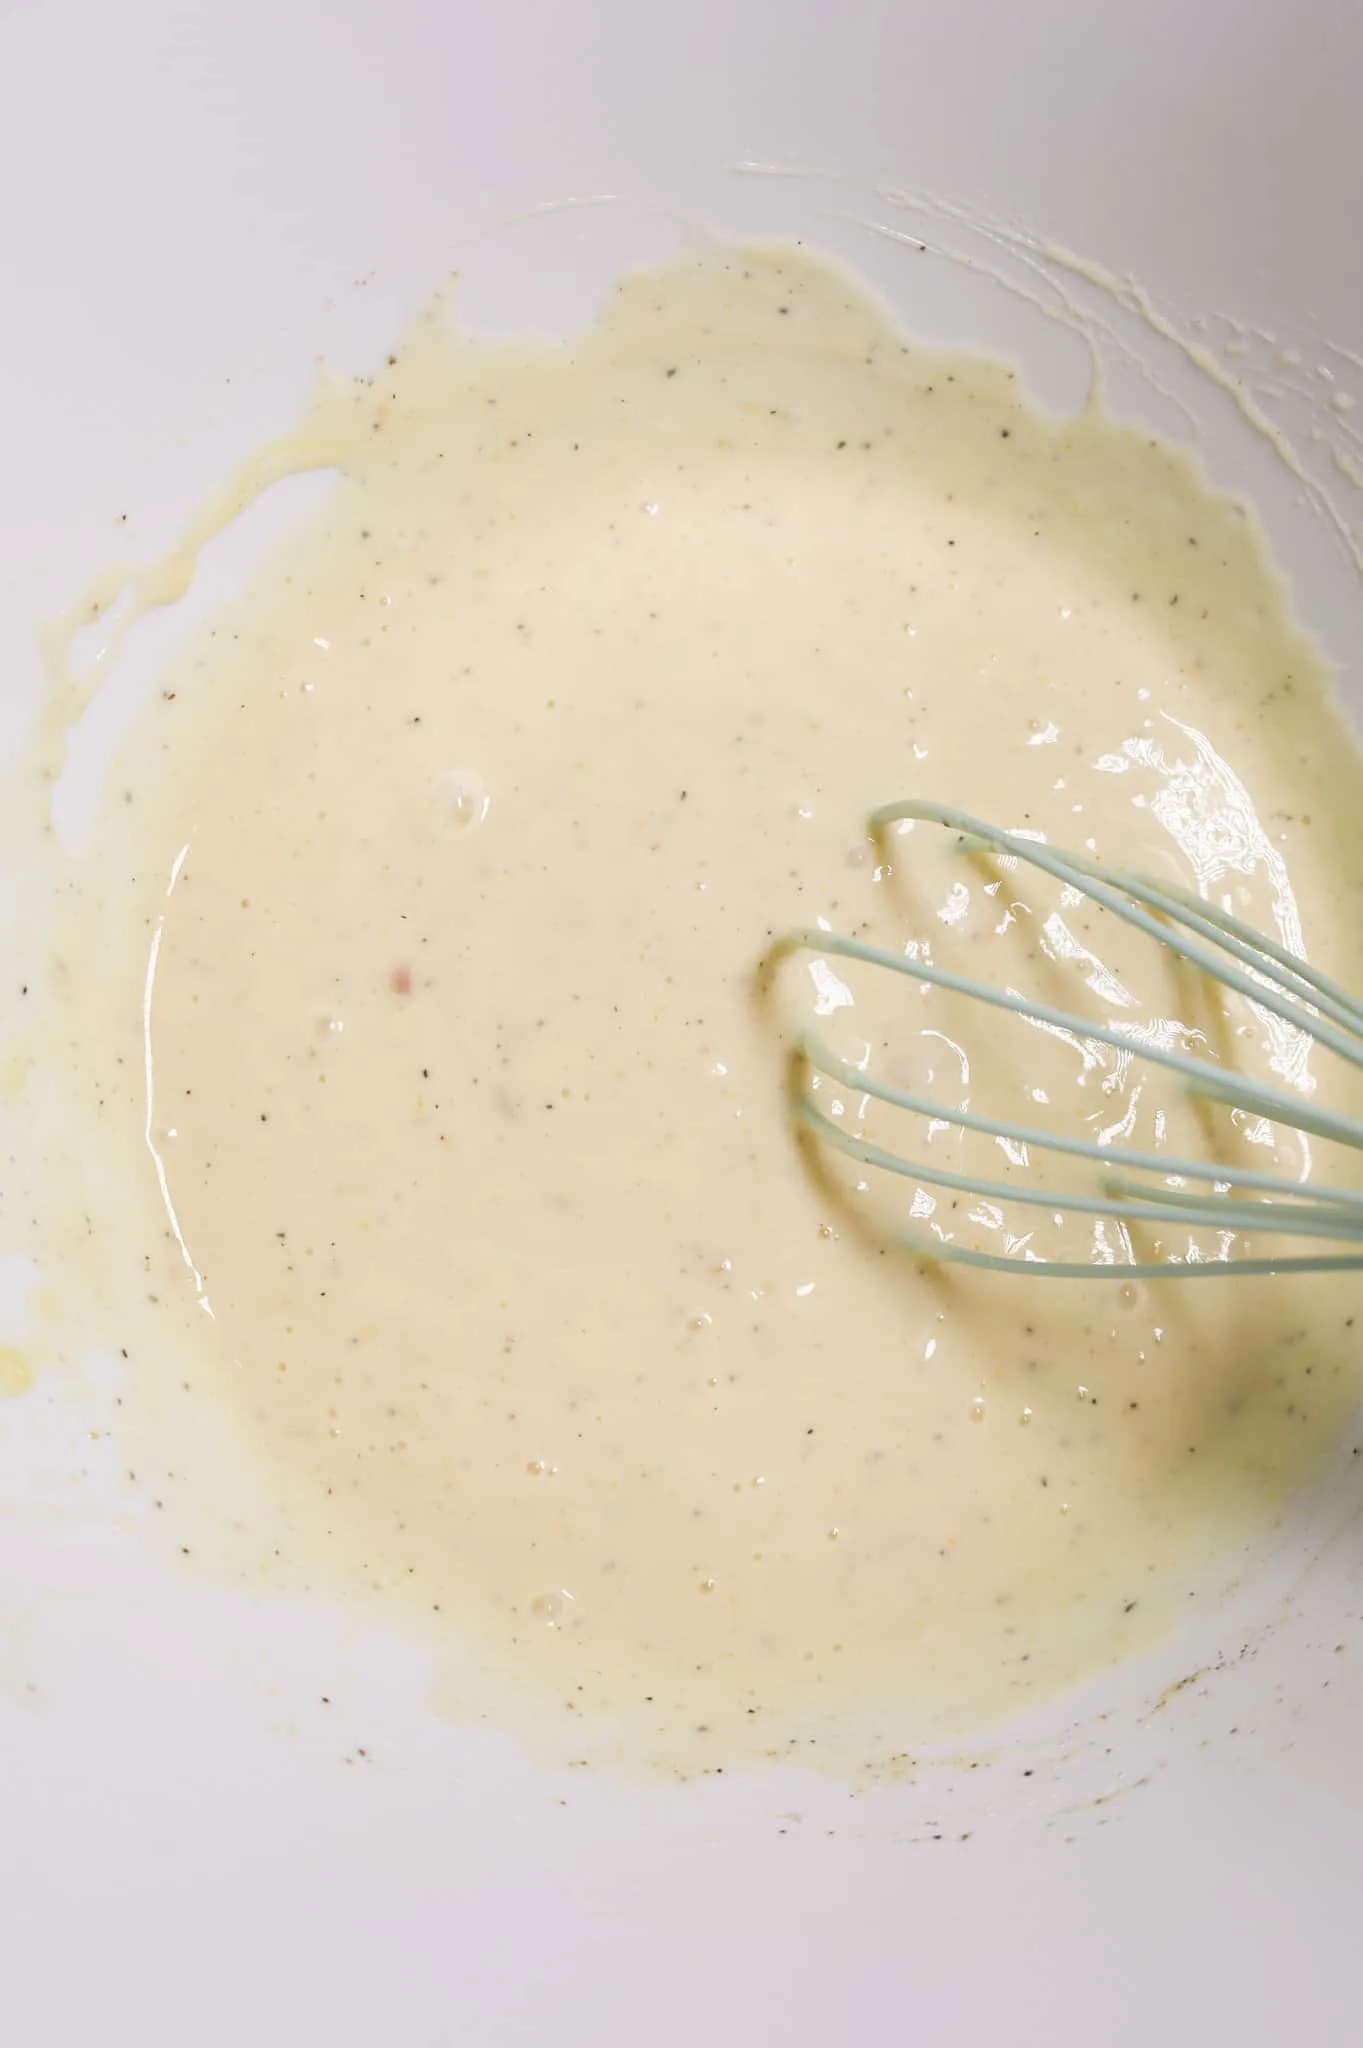 creamy soup and seasoning mixture in a mixing bowl